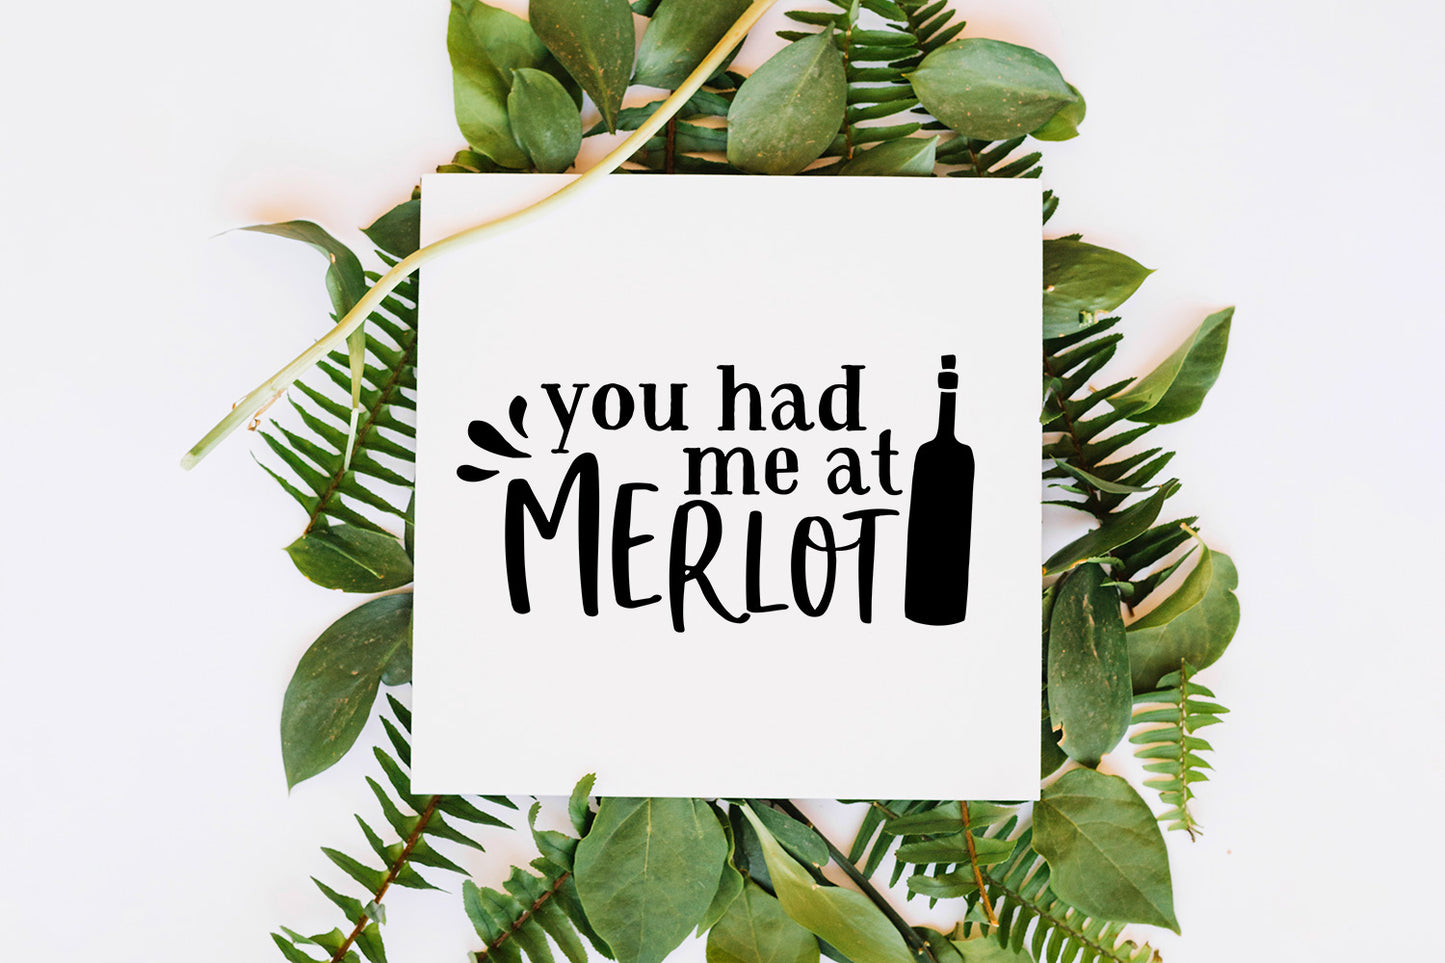 Wine Lover Quote SVG Bundle | 25 Pack